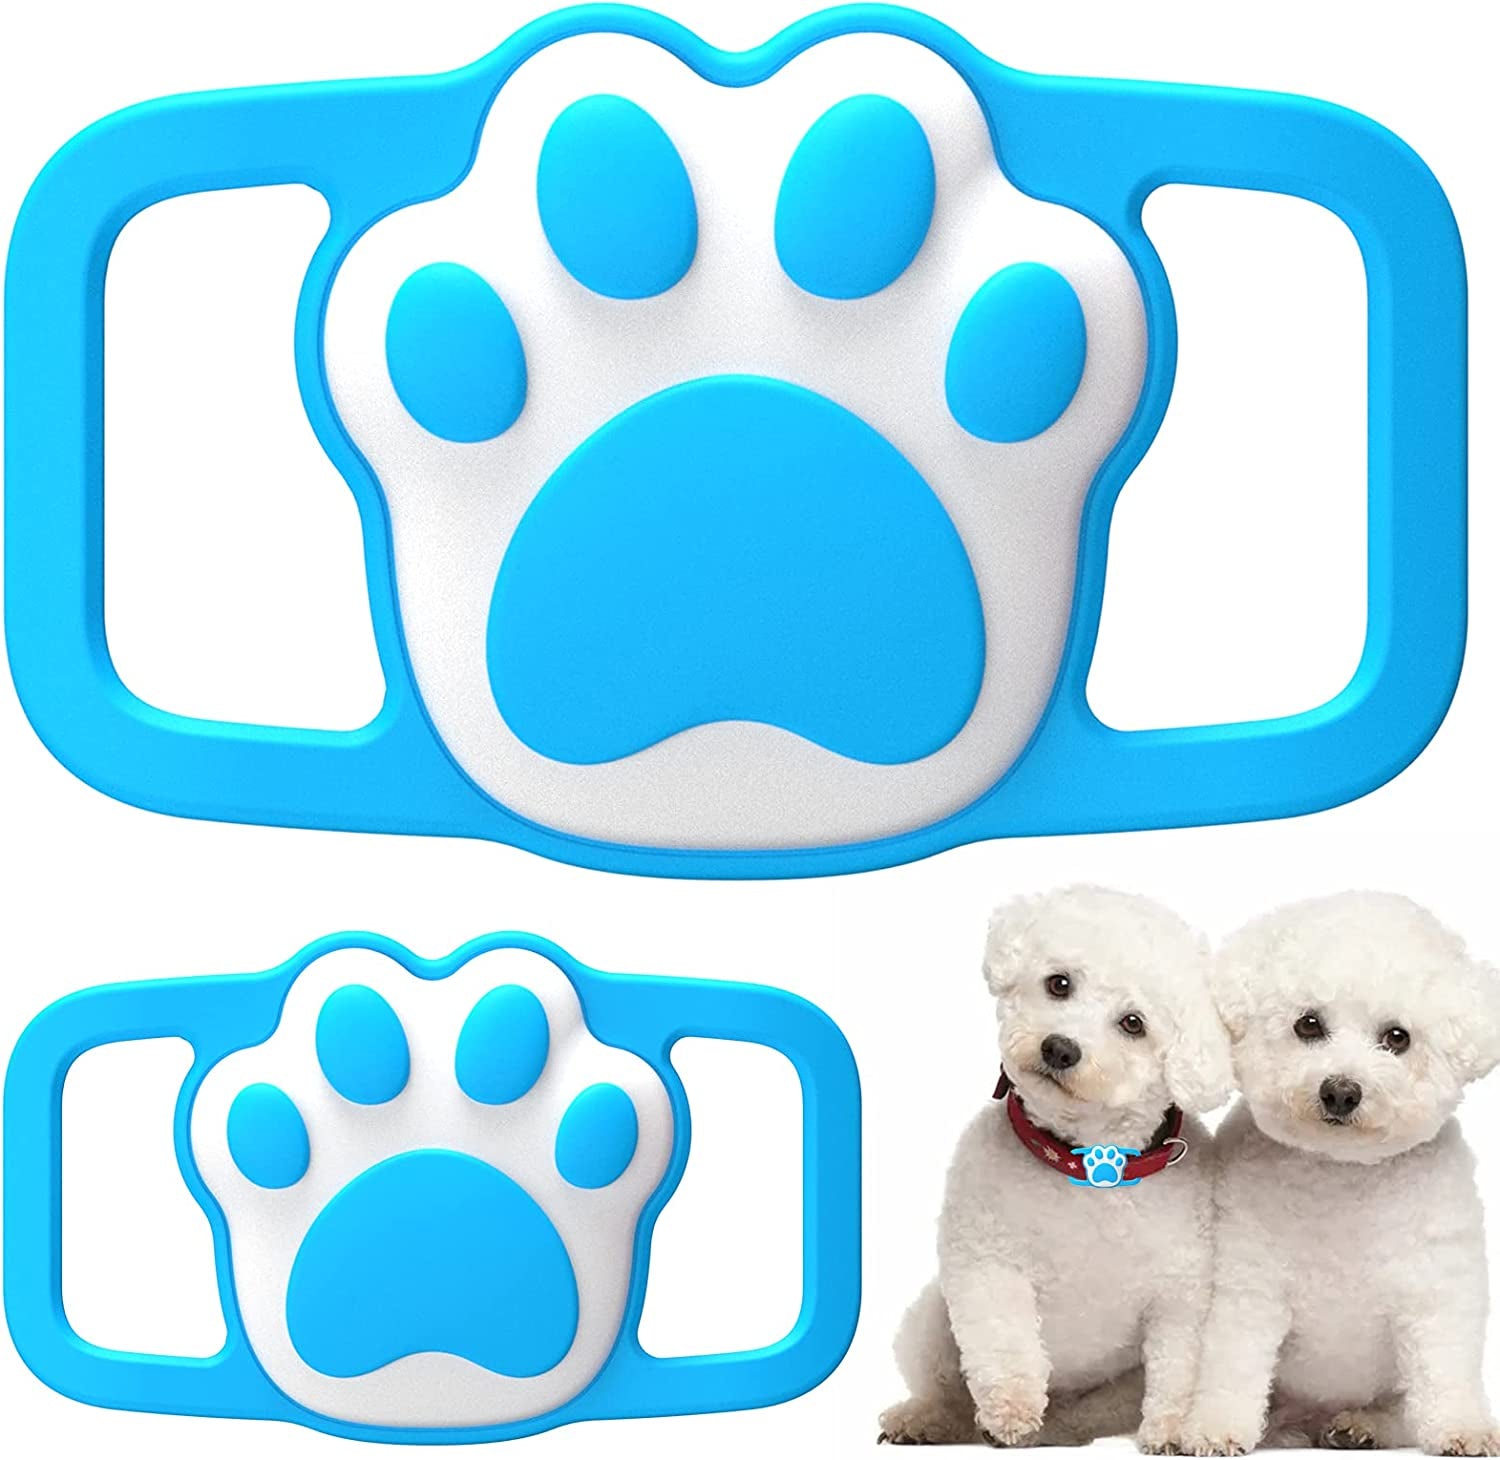 Lopnord Airtag Dog Collar Holder Compatible with Apple Air Tag GPS, 2 Pack Airtags Dog Tag Collar Waterproof Silicone Case, Airtag Protective Cover for Pet Dog Cat Collar Backpack